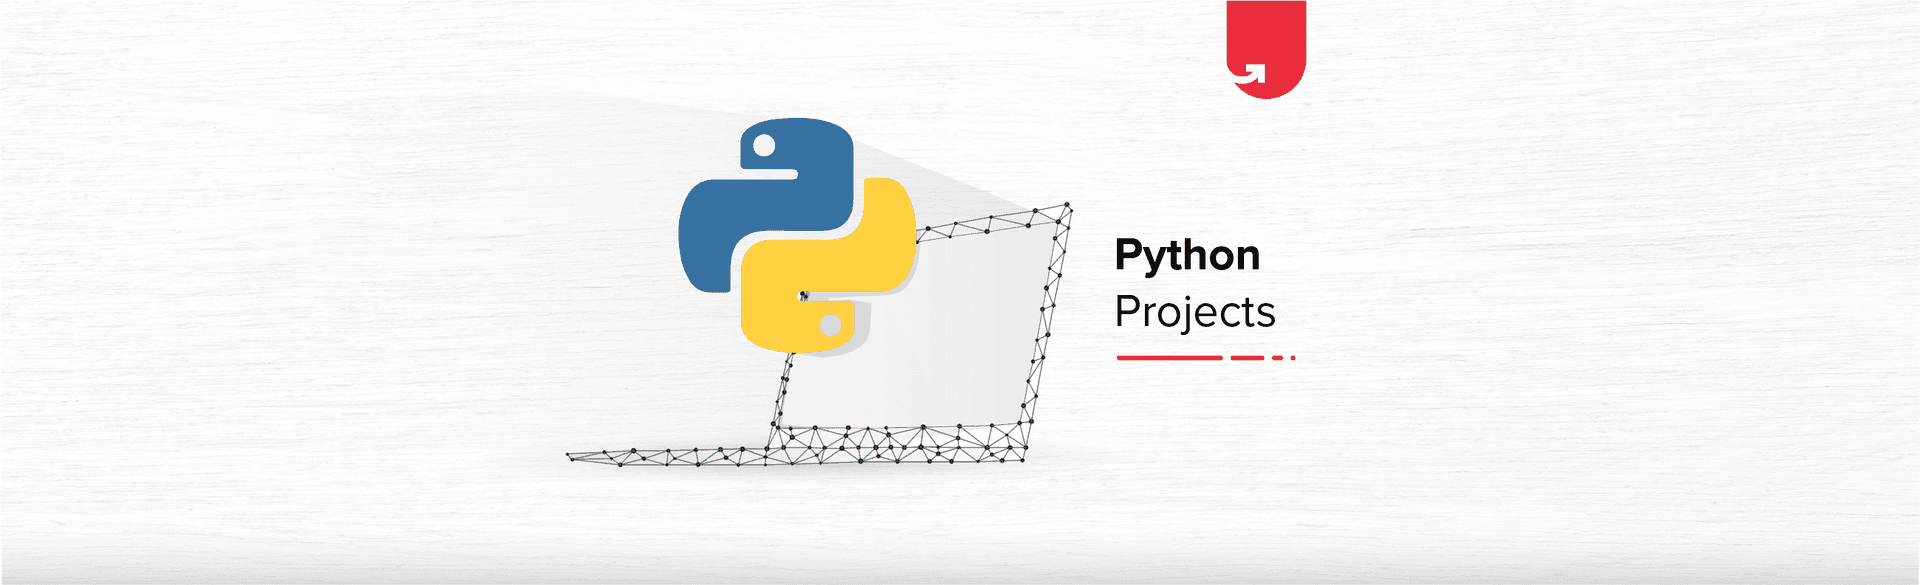 Python Projects for Beginners &#8211; List of 7